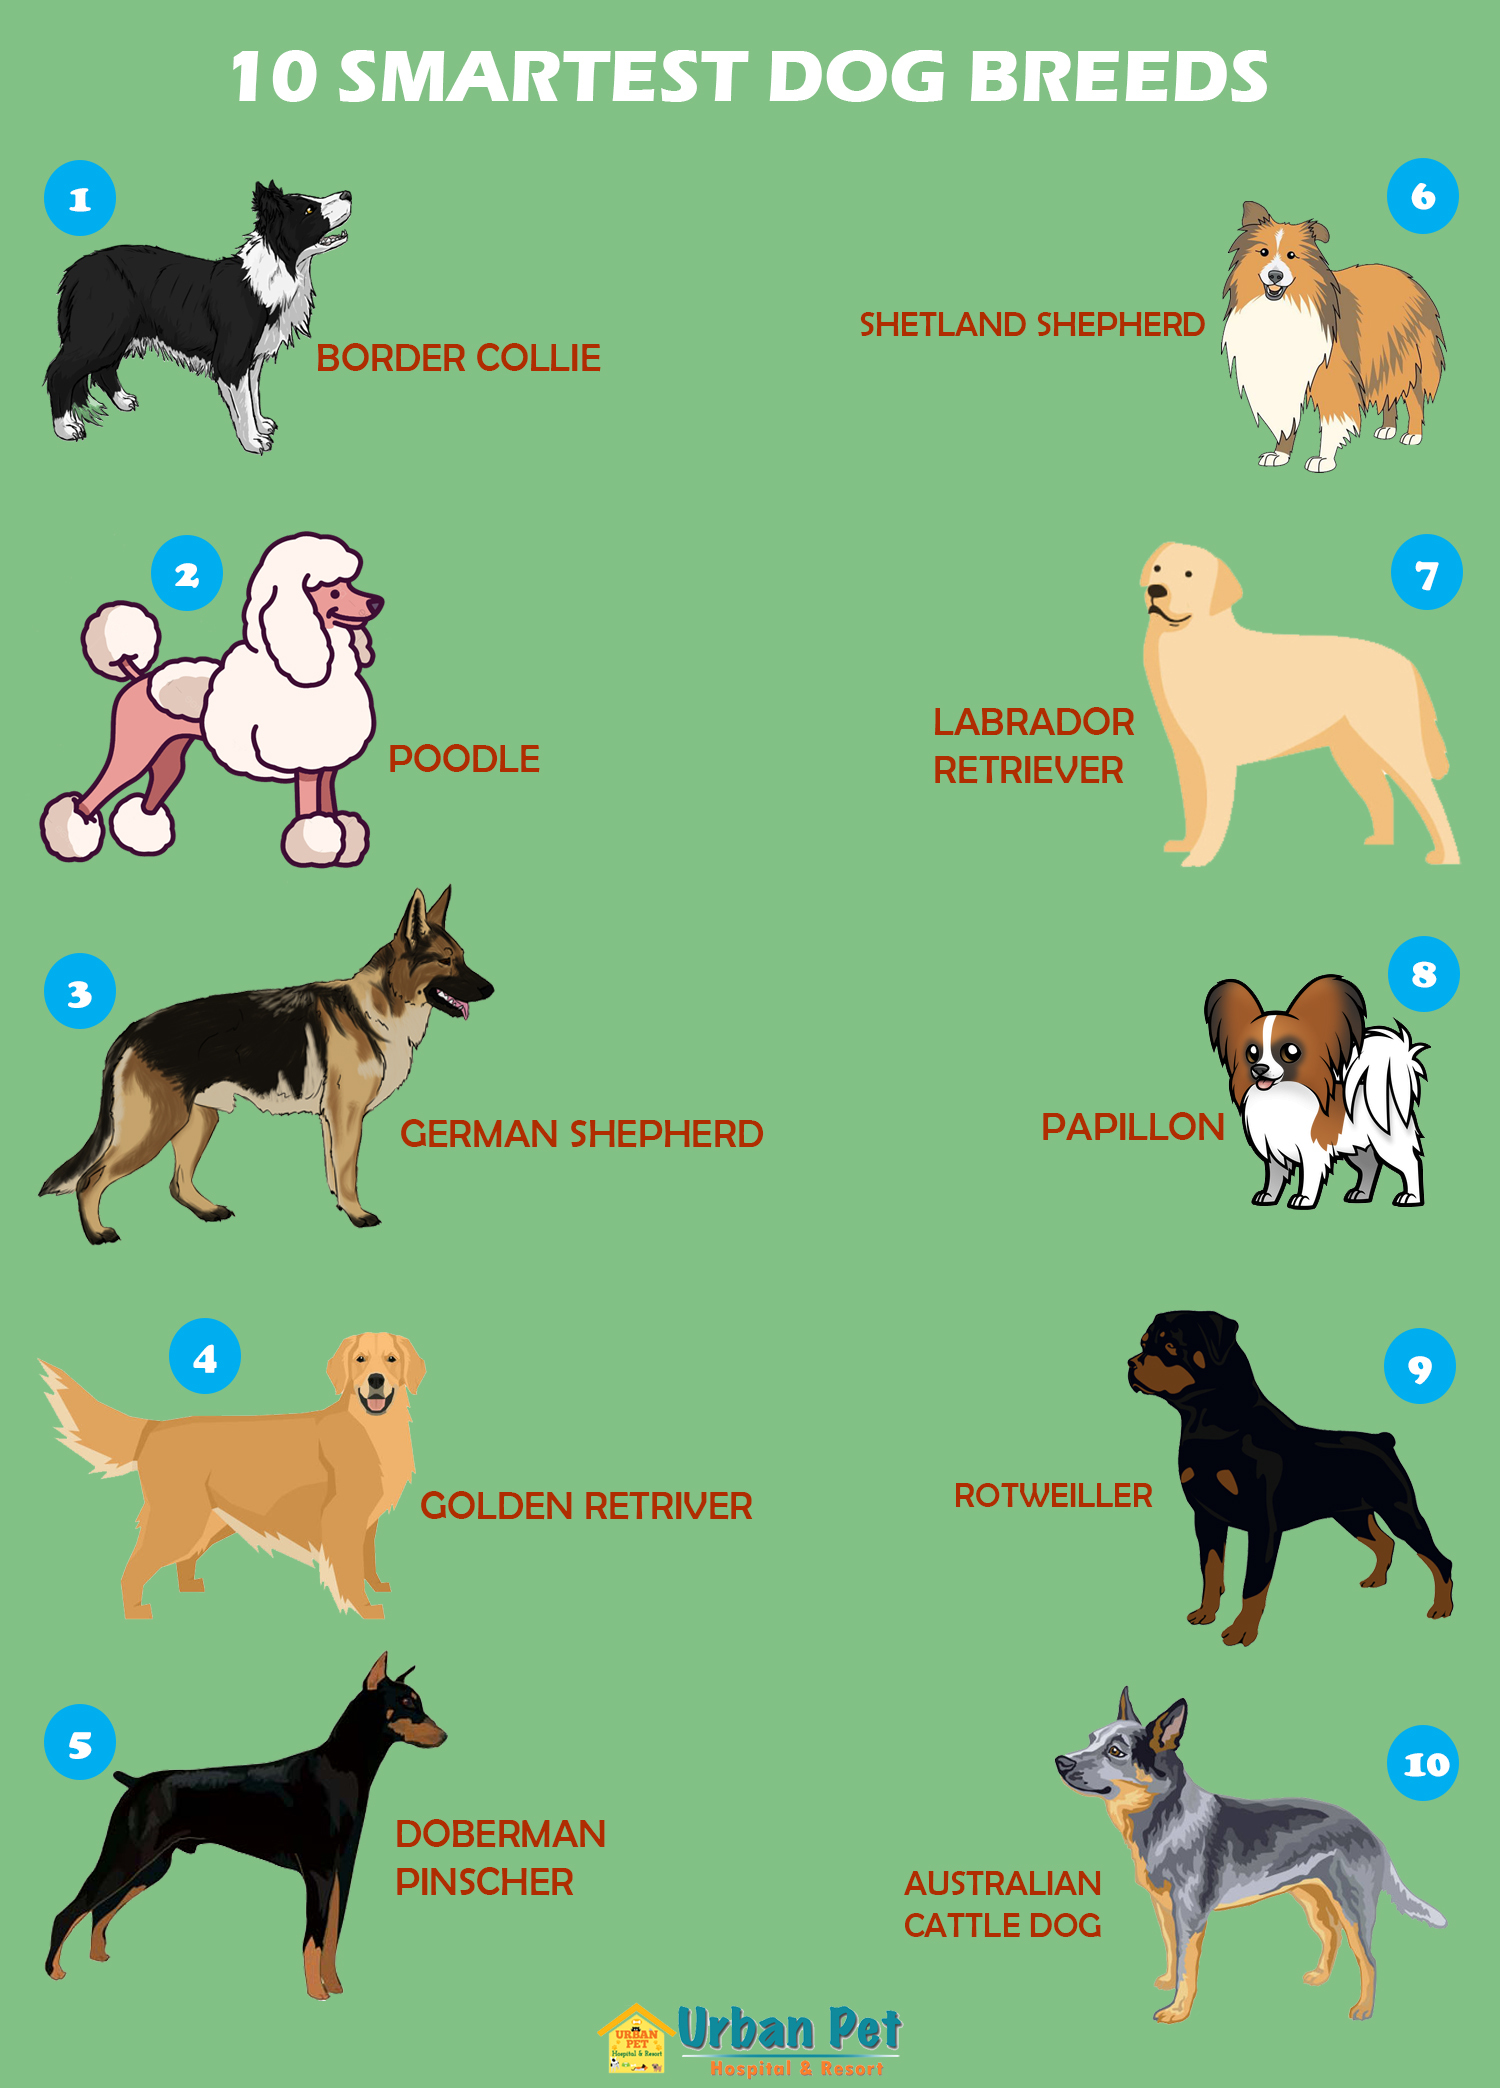 Pet News Articles Urban Pet Hospital Blog Urban Pet Hospital Updates Articles And News On Pet Health Services Dos And Don Ts Tips And Many More About Pets Visit Us